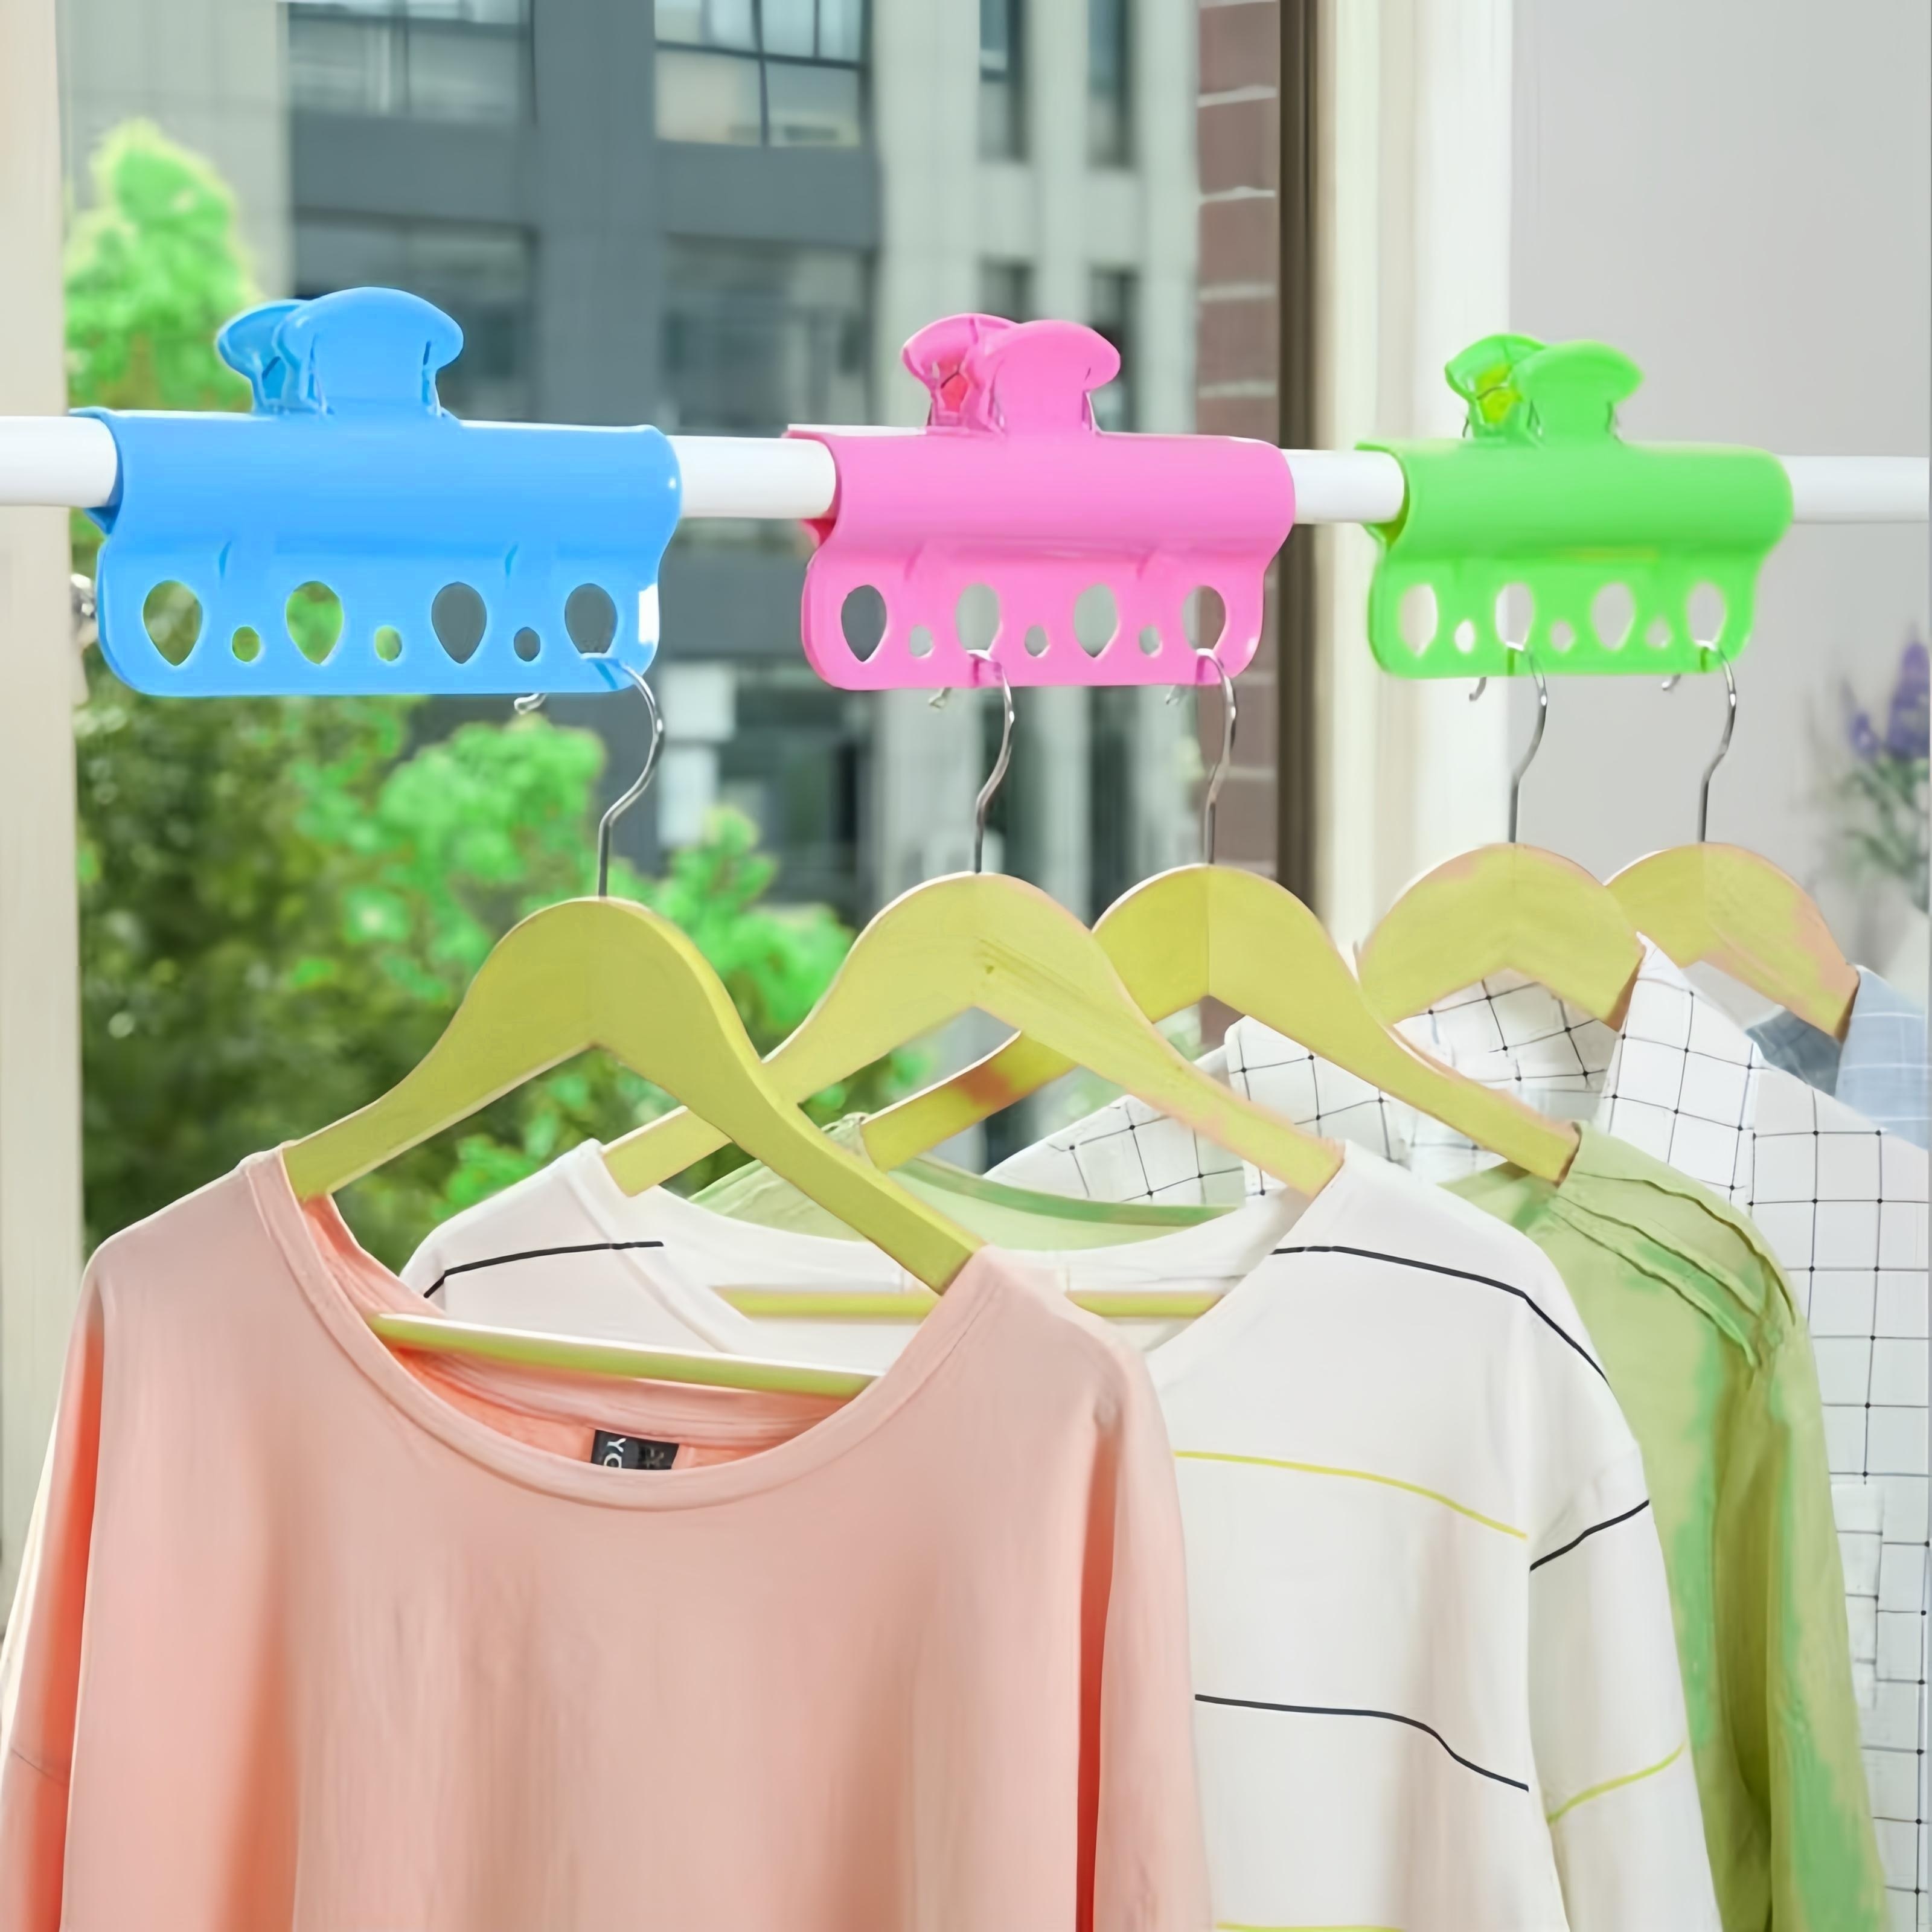 

1pc 7-hole Windproof Clip For Clothes Hanger, Plastic Clothes Pole Fixing Clip For Clothesline Pole, Balcony Clothes Drying Rack Clamp